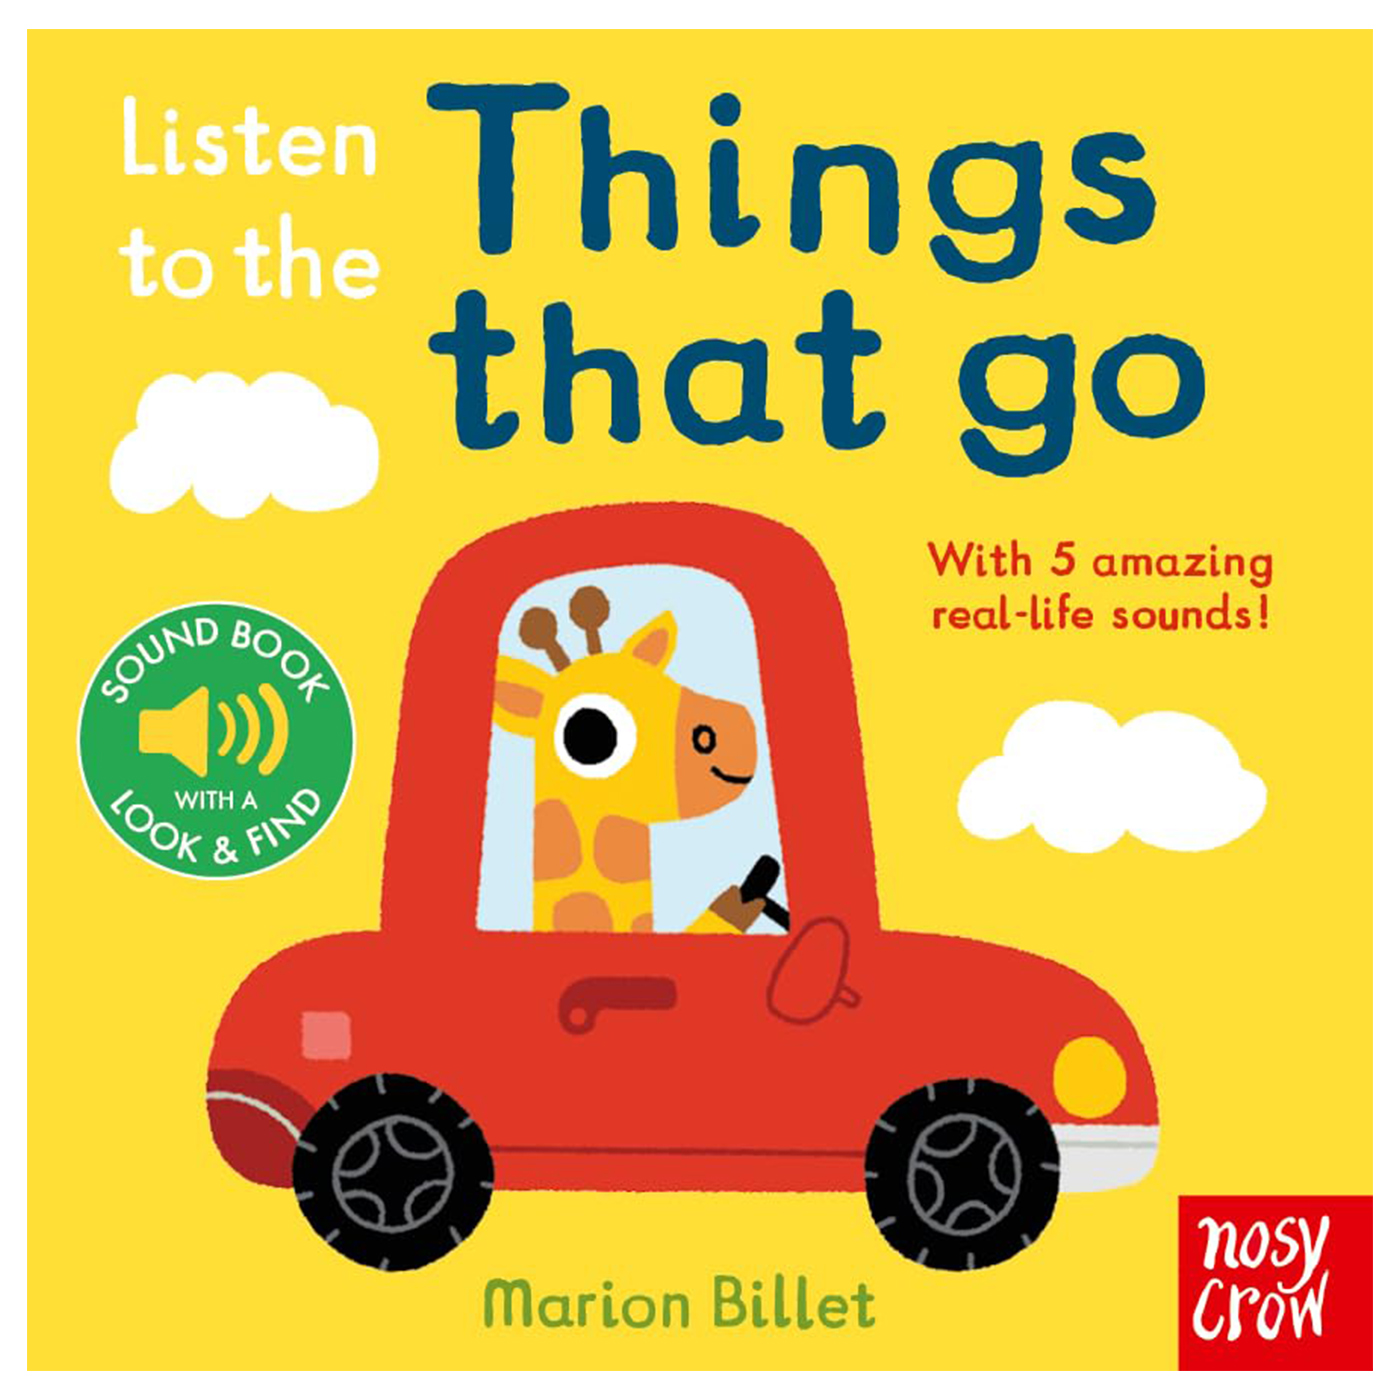  Listen to the: Things that go